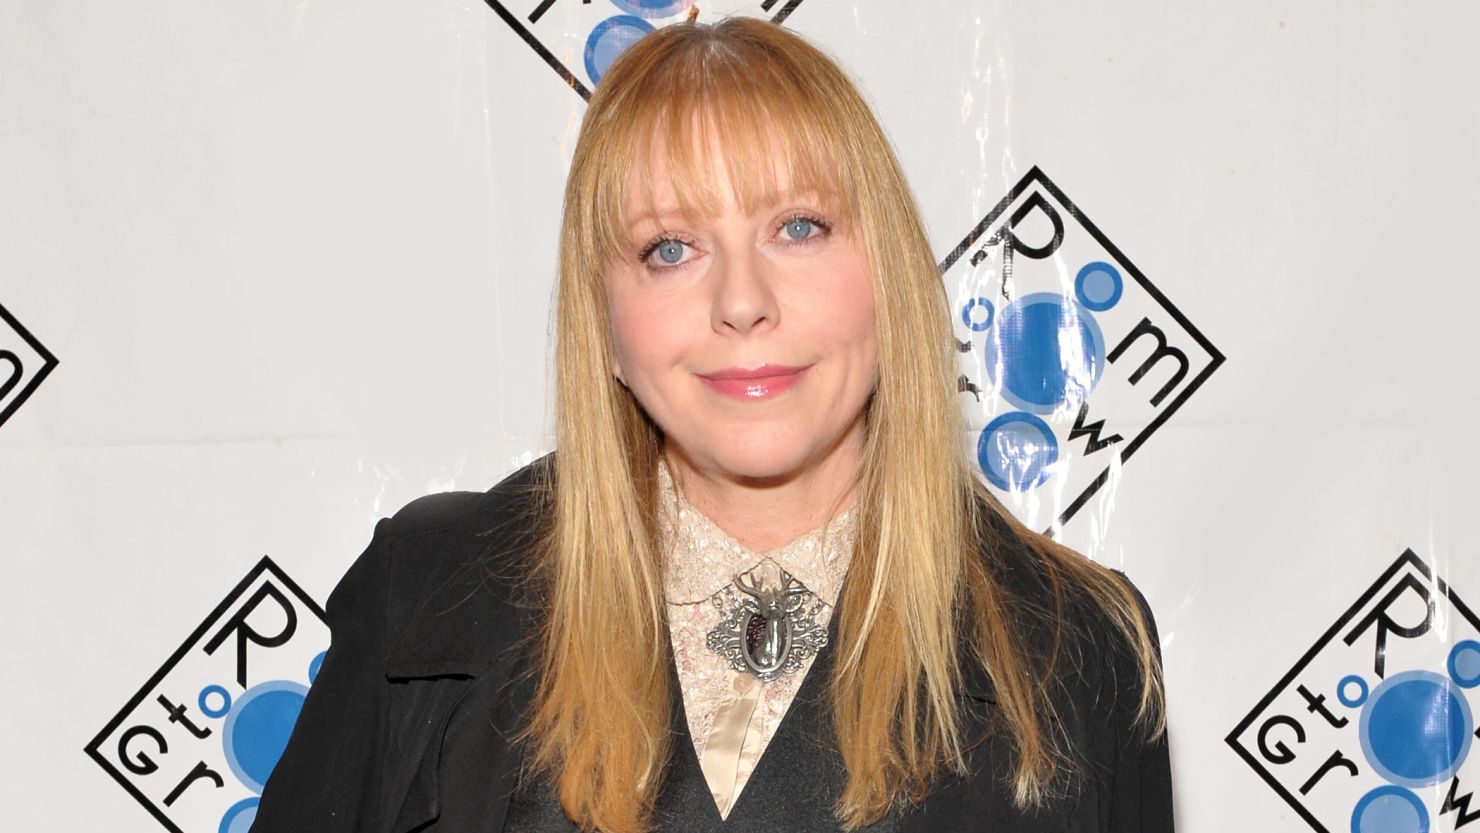 Bebe Buell attends the 2012 Room to Grow fundraising gala in February in New York City.